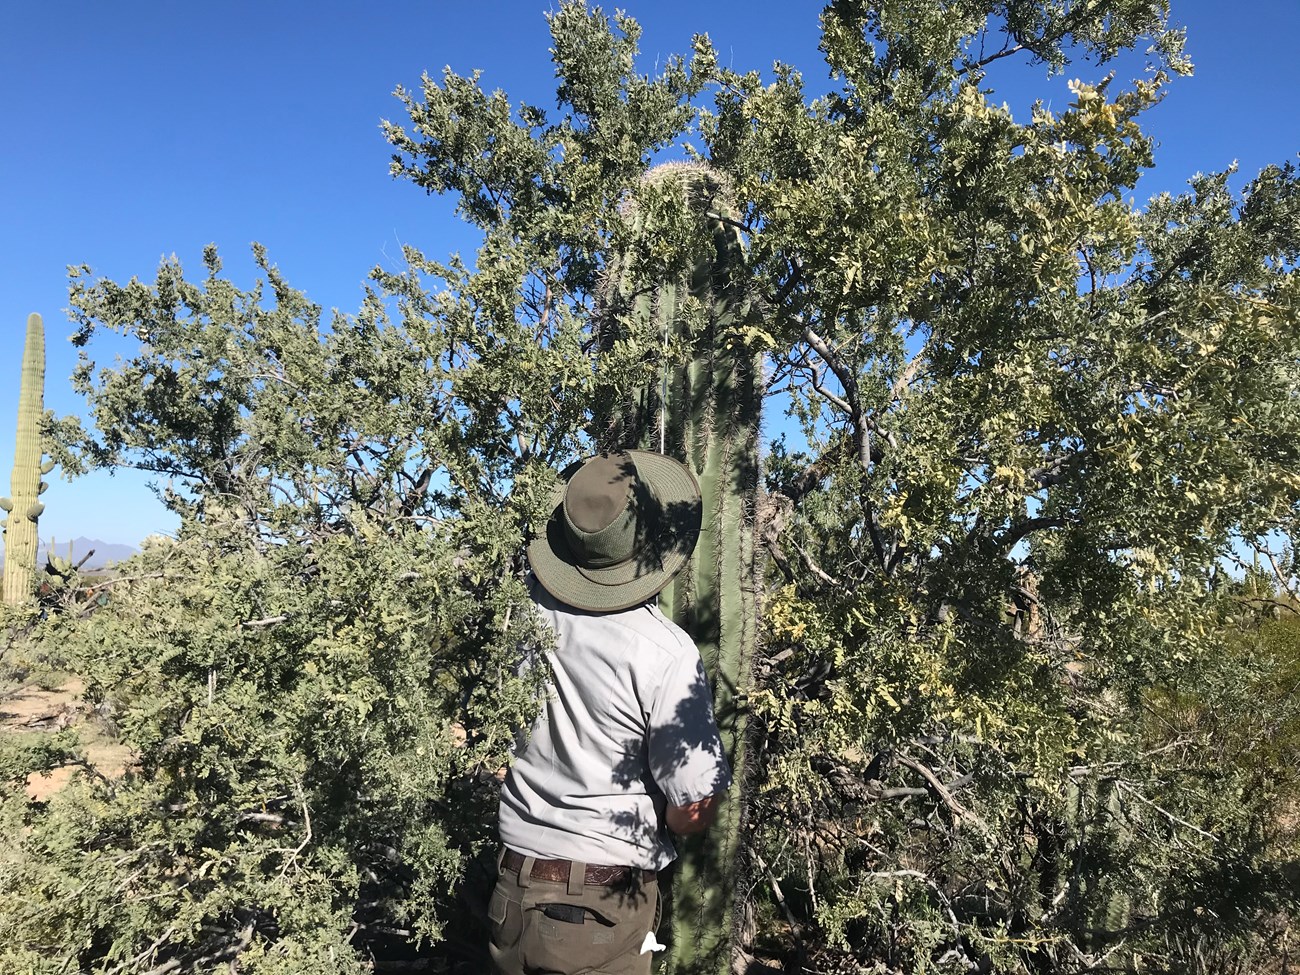 Park staff reaches into ironwood tree to measure saguaro with meter stick